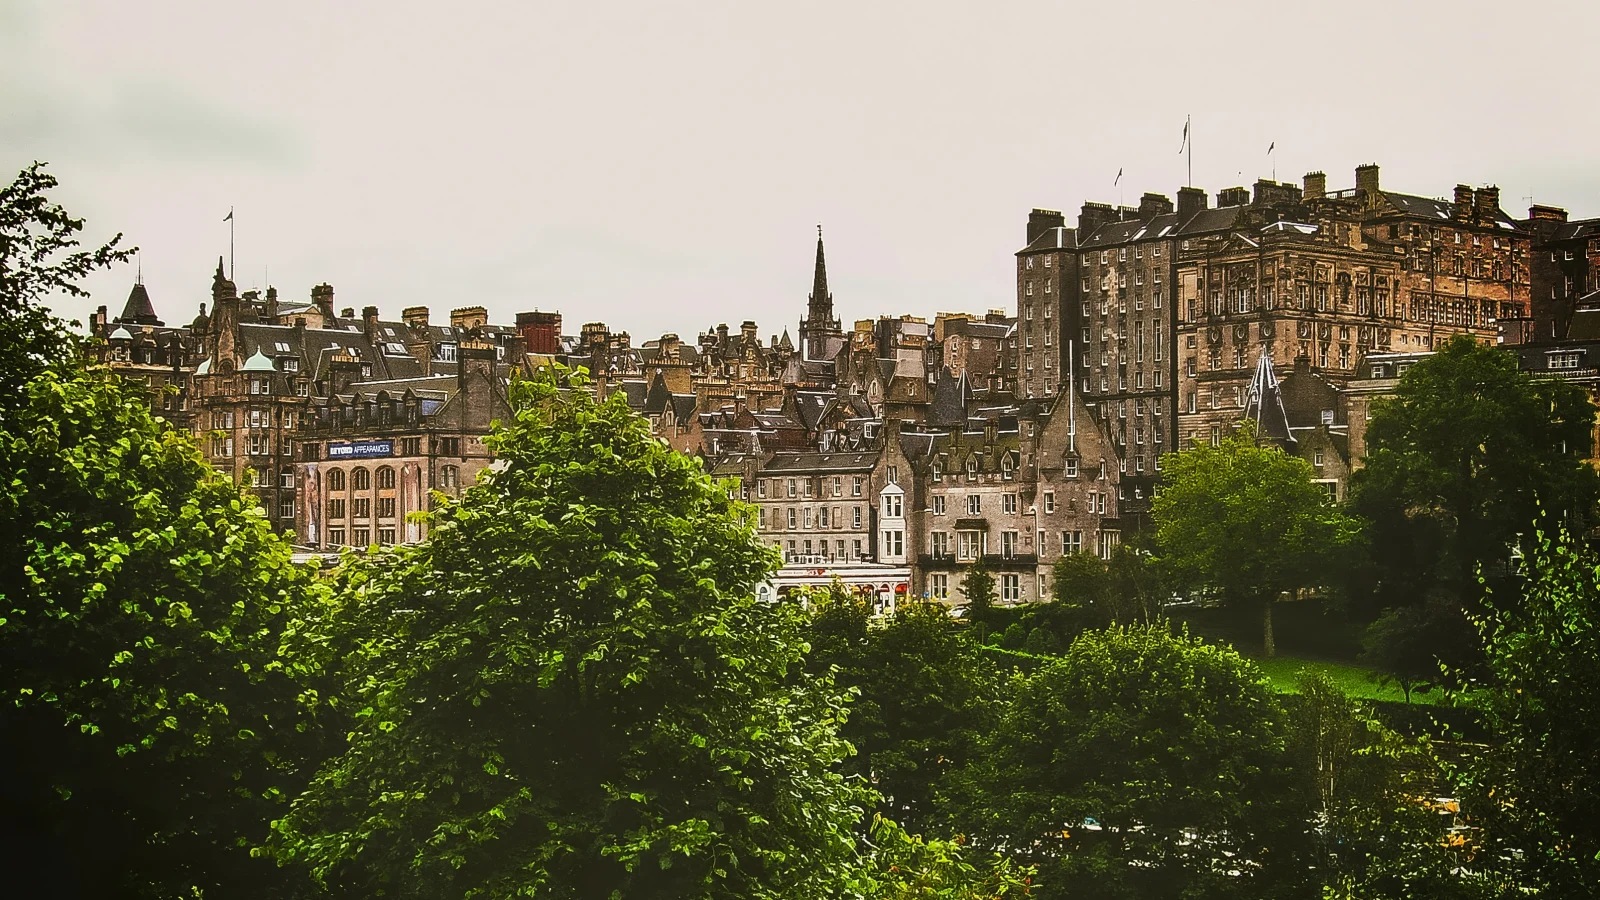 Exploring Bruntsfield: Coffee, Parks, and Local Charm